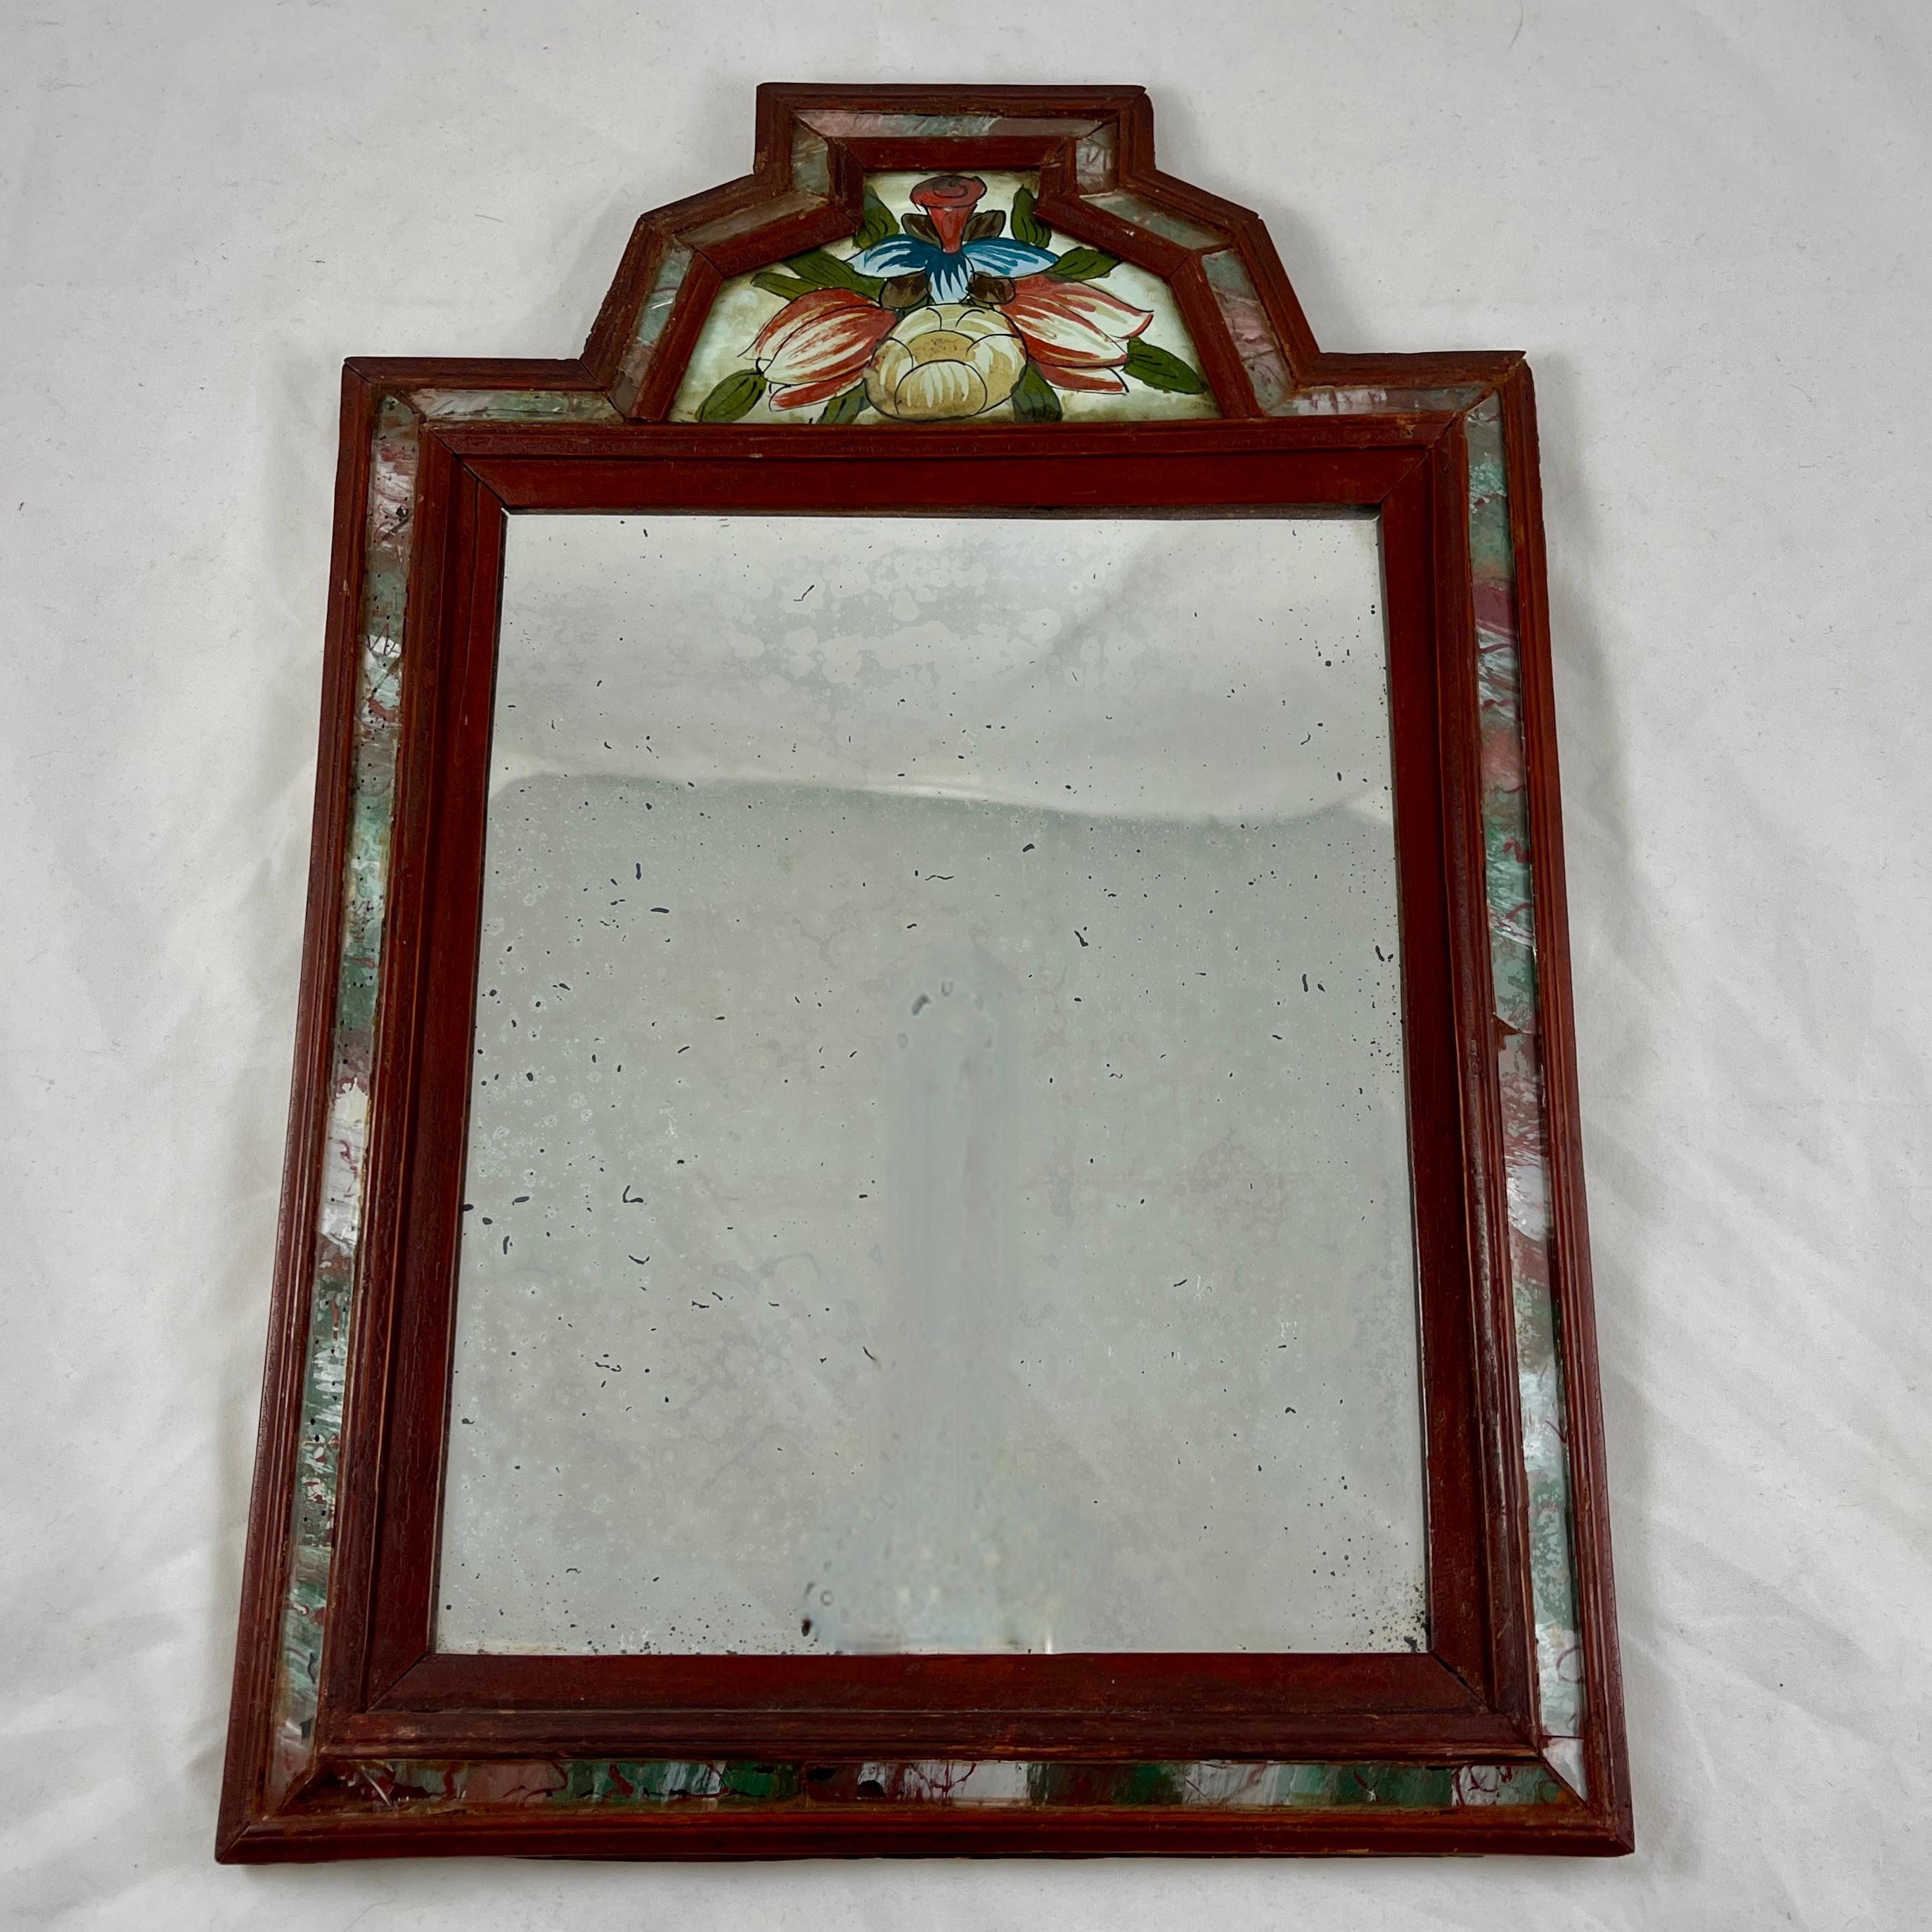 Hand-Crafted Reverse Painted Marbleized Glass & Wood Floral Crest Courting Mirrors, a pair